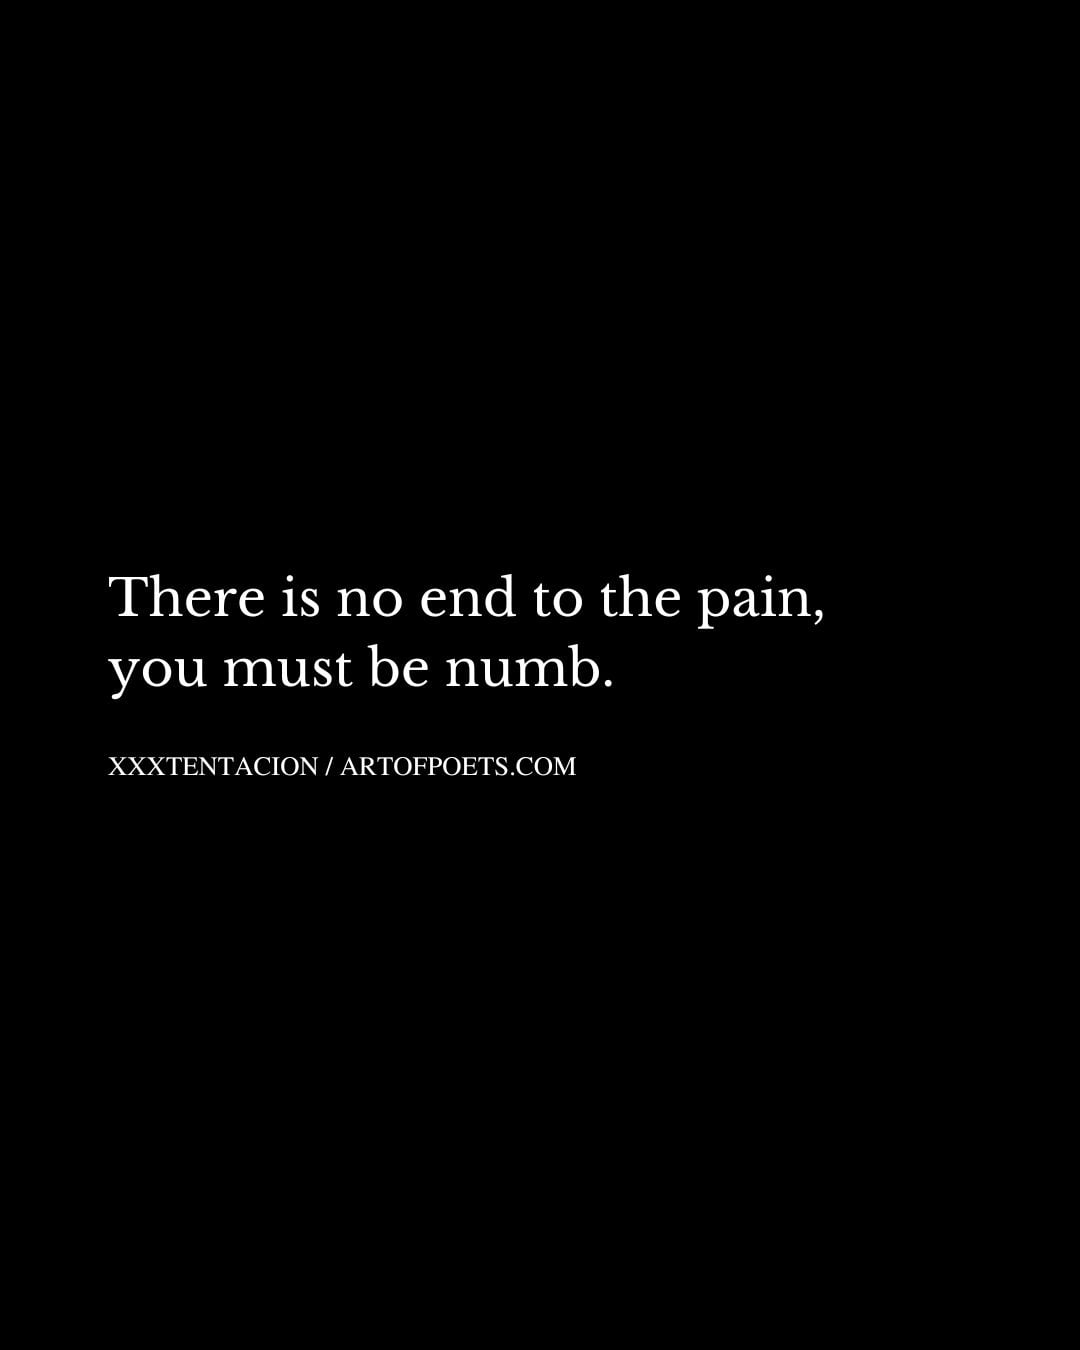 There is no end to the pain you must be numb